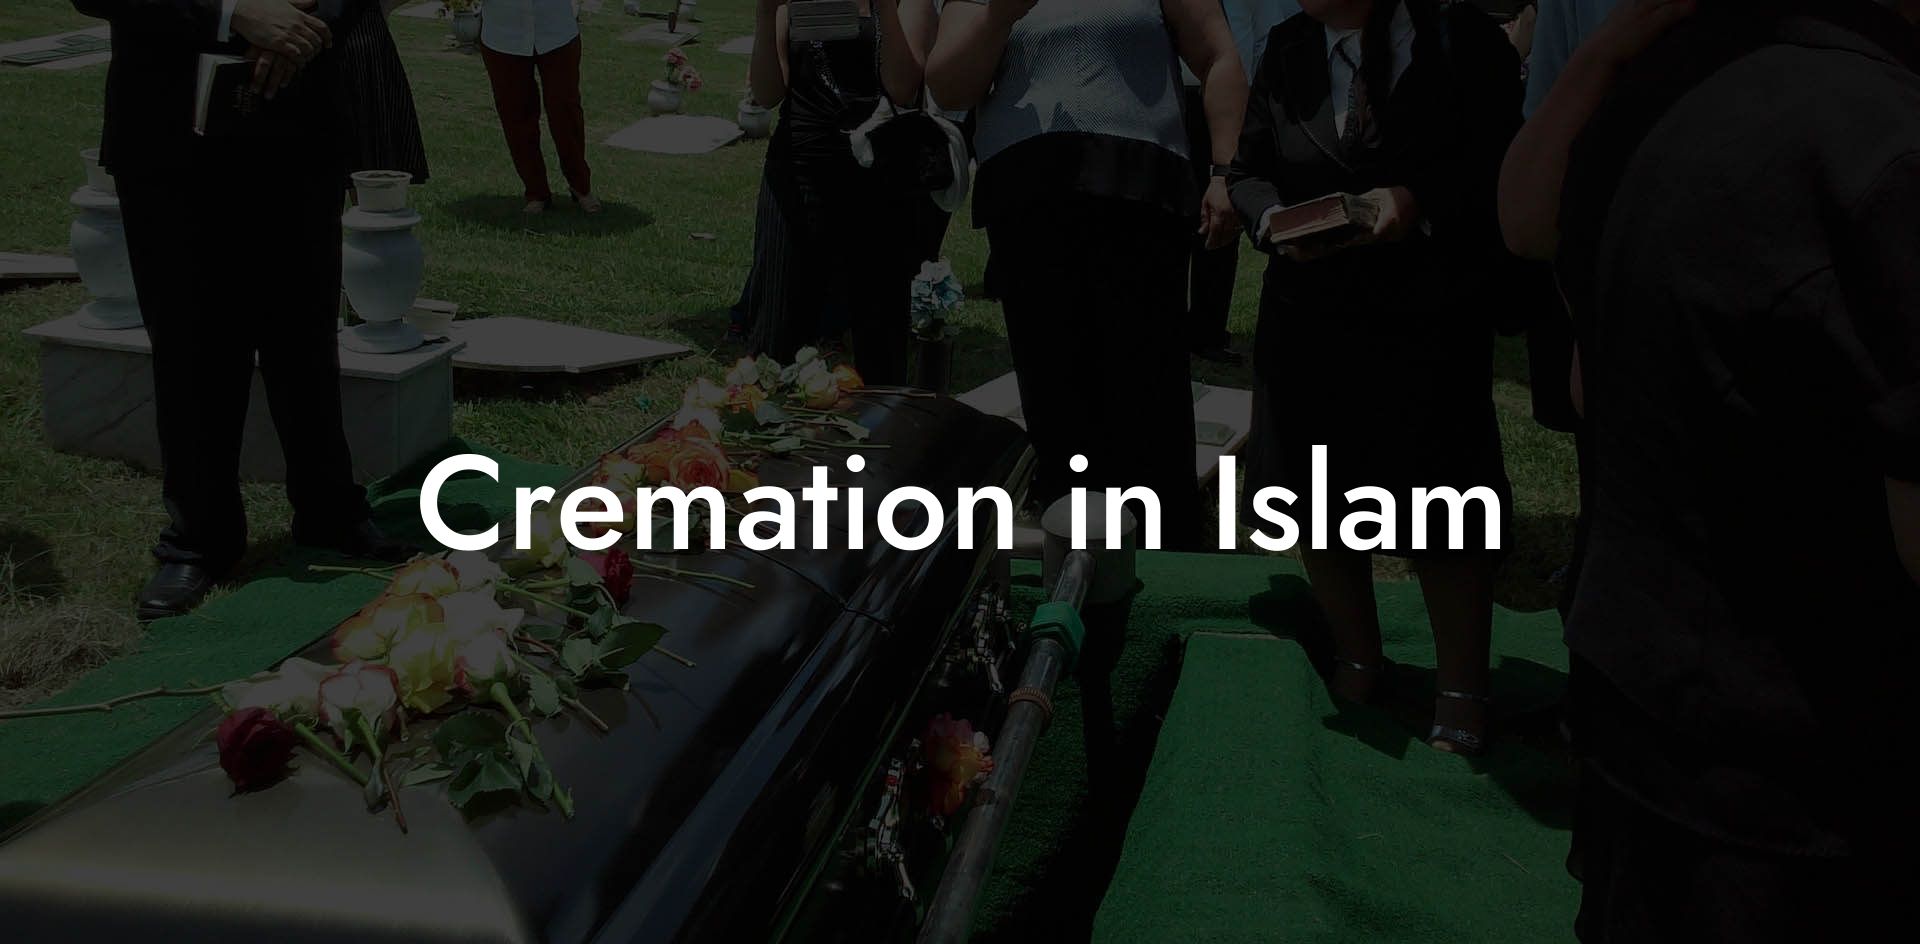 Cremation in Islam